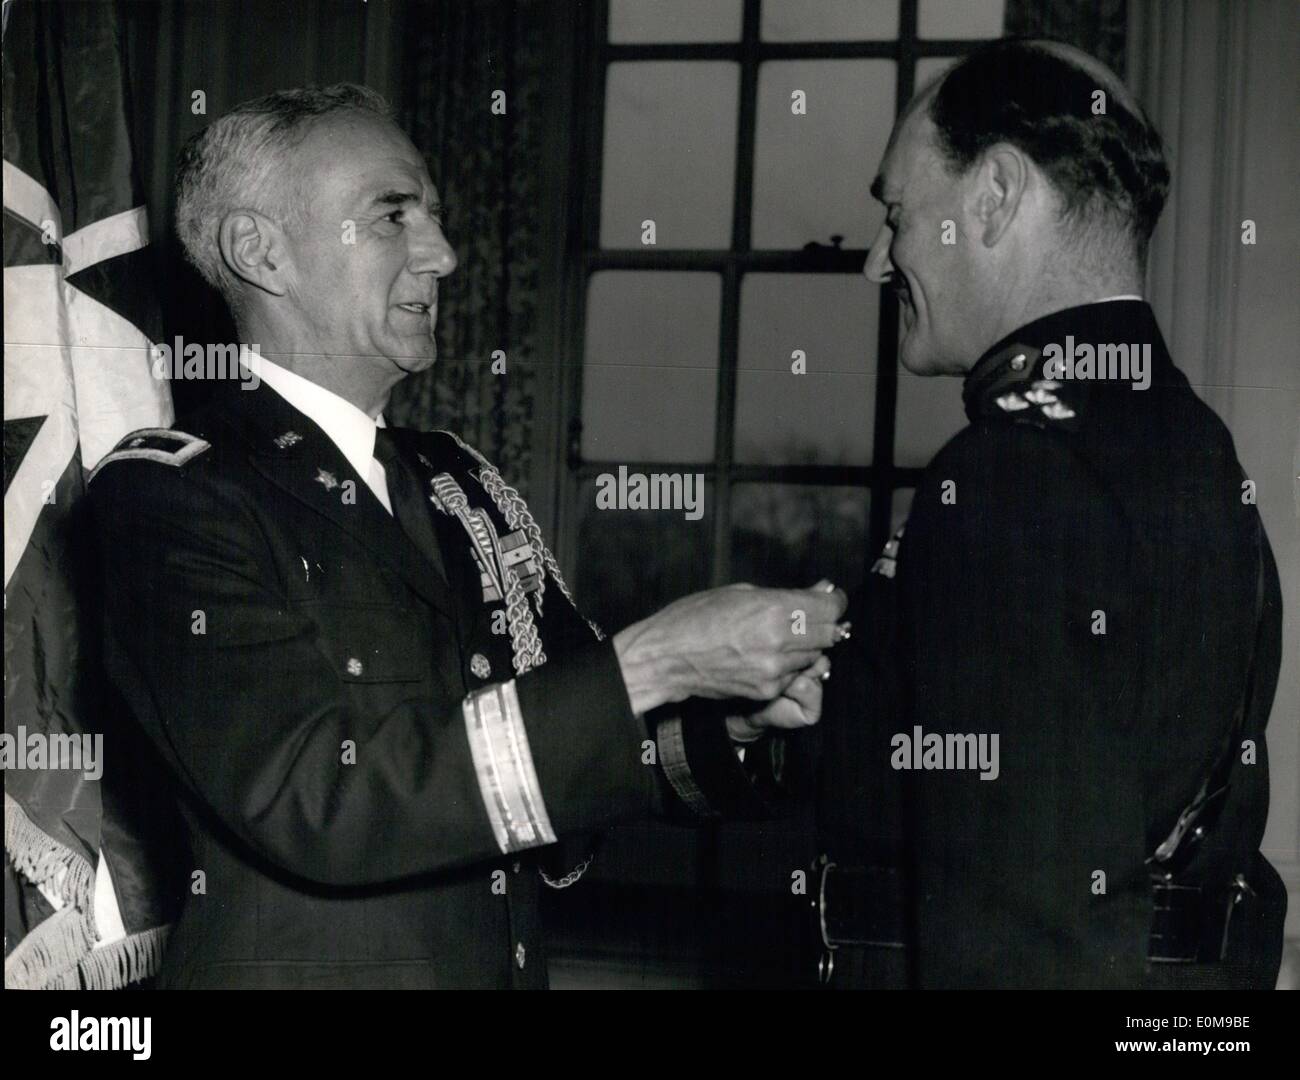 Mar. 03, 1954 - British Officer Honoured By Americans. Brigadierabdy H.G. Ricketts, CBF, DSO, Sachool of Land, Air Warfare, R.A.F. Station Old Sarum, Wilts, receives the Legion of Merit, Degree of Officer, From U.S. Army Attache General R.E.S. Williamson (left) during today;s Investiture, Mar 19, at London's Winfield House. Brigadier Ricketts was decorated for distinguished service as commander of the 29th Britsih infantry division in Korea. The citation praised his forseful leadership, keen discernment of the tactical situation, and able coordination of staff finctions. Stock Photo